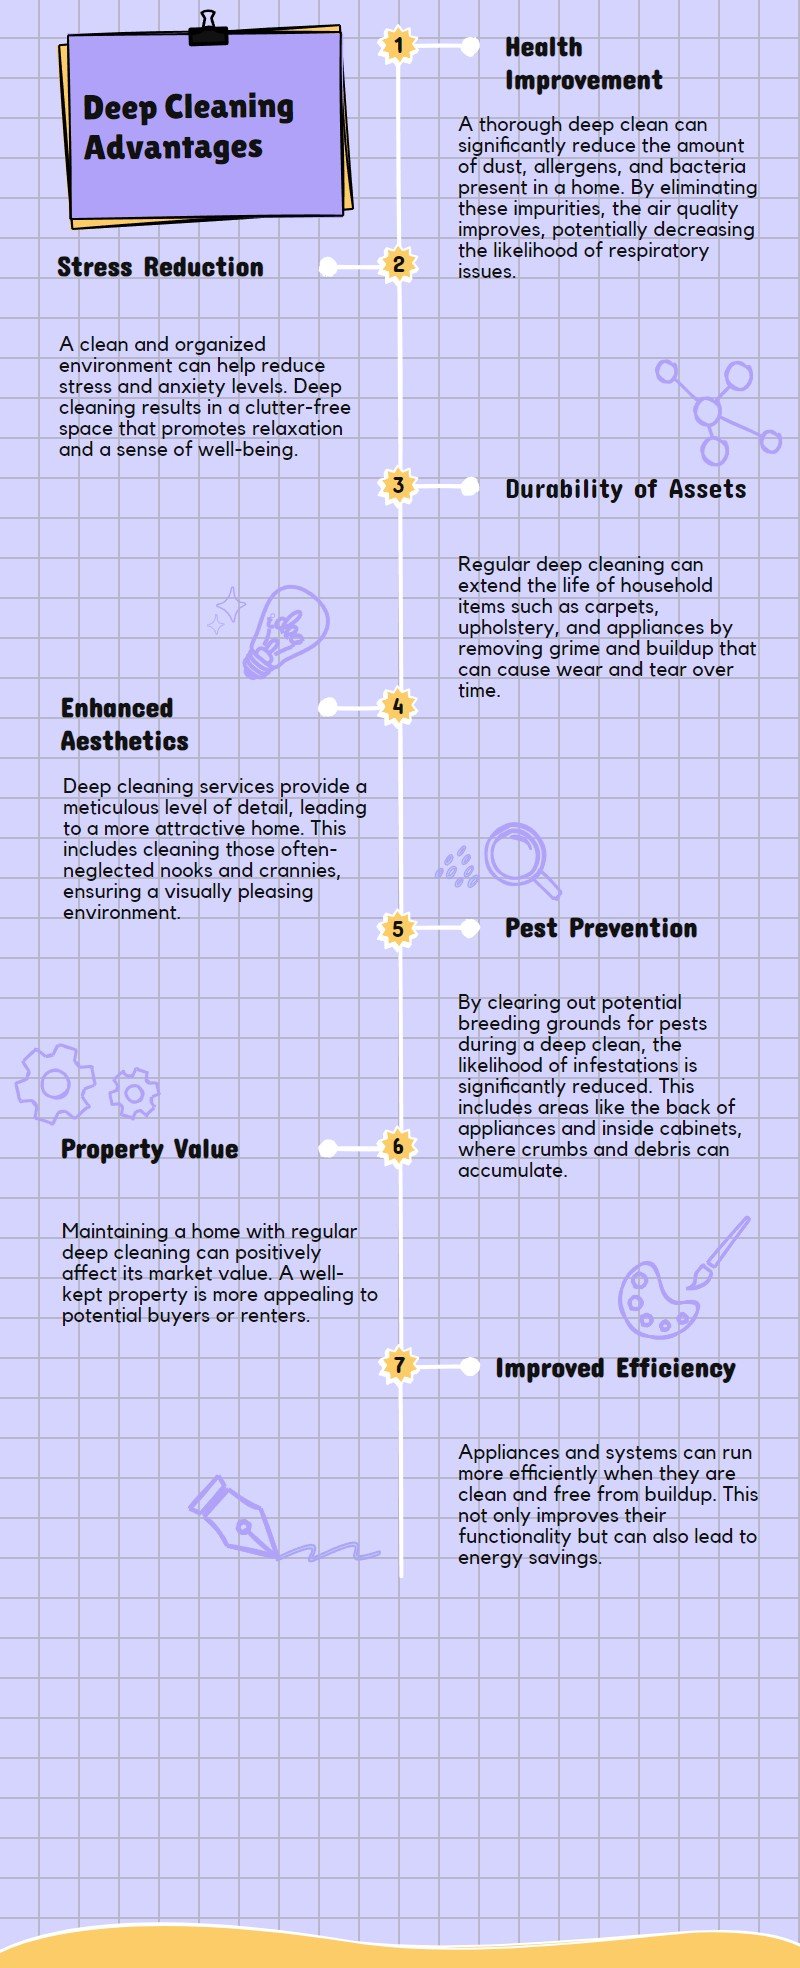 An infographic listing the advantages of deep cleaning, such as health improvements, durability of assets, aesthetic enhancements, pest prevention, property value increase, and improved efficiency.